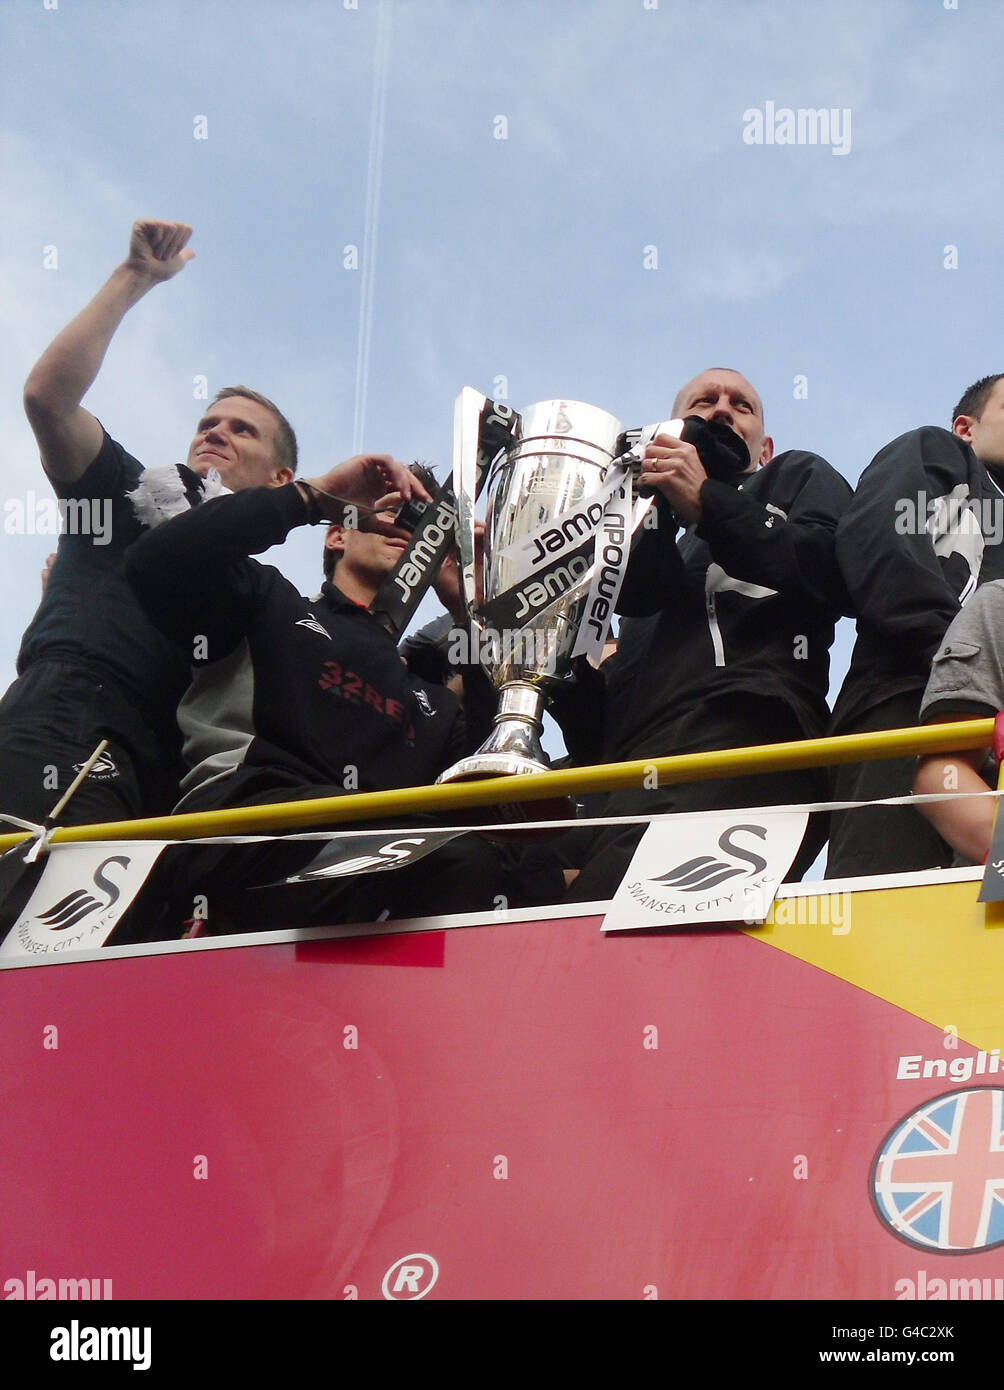 Soccer - Swansea Premier League Promotion Parade. The Swansea City team on top of the bus after it arrived at Swansea Guildhall during the bus parade through Swansea. Stock Photo